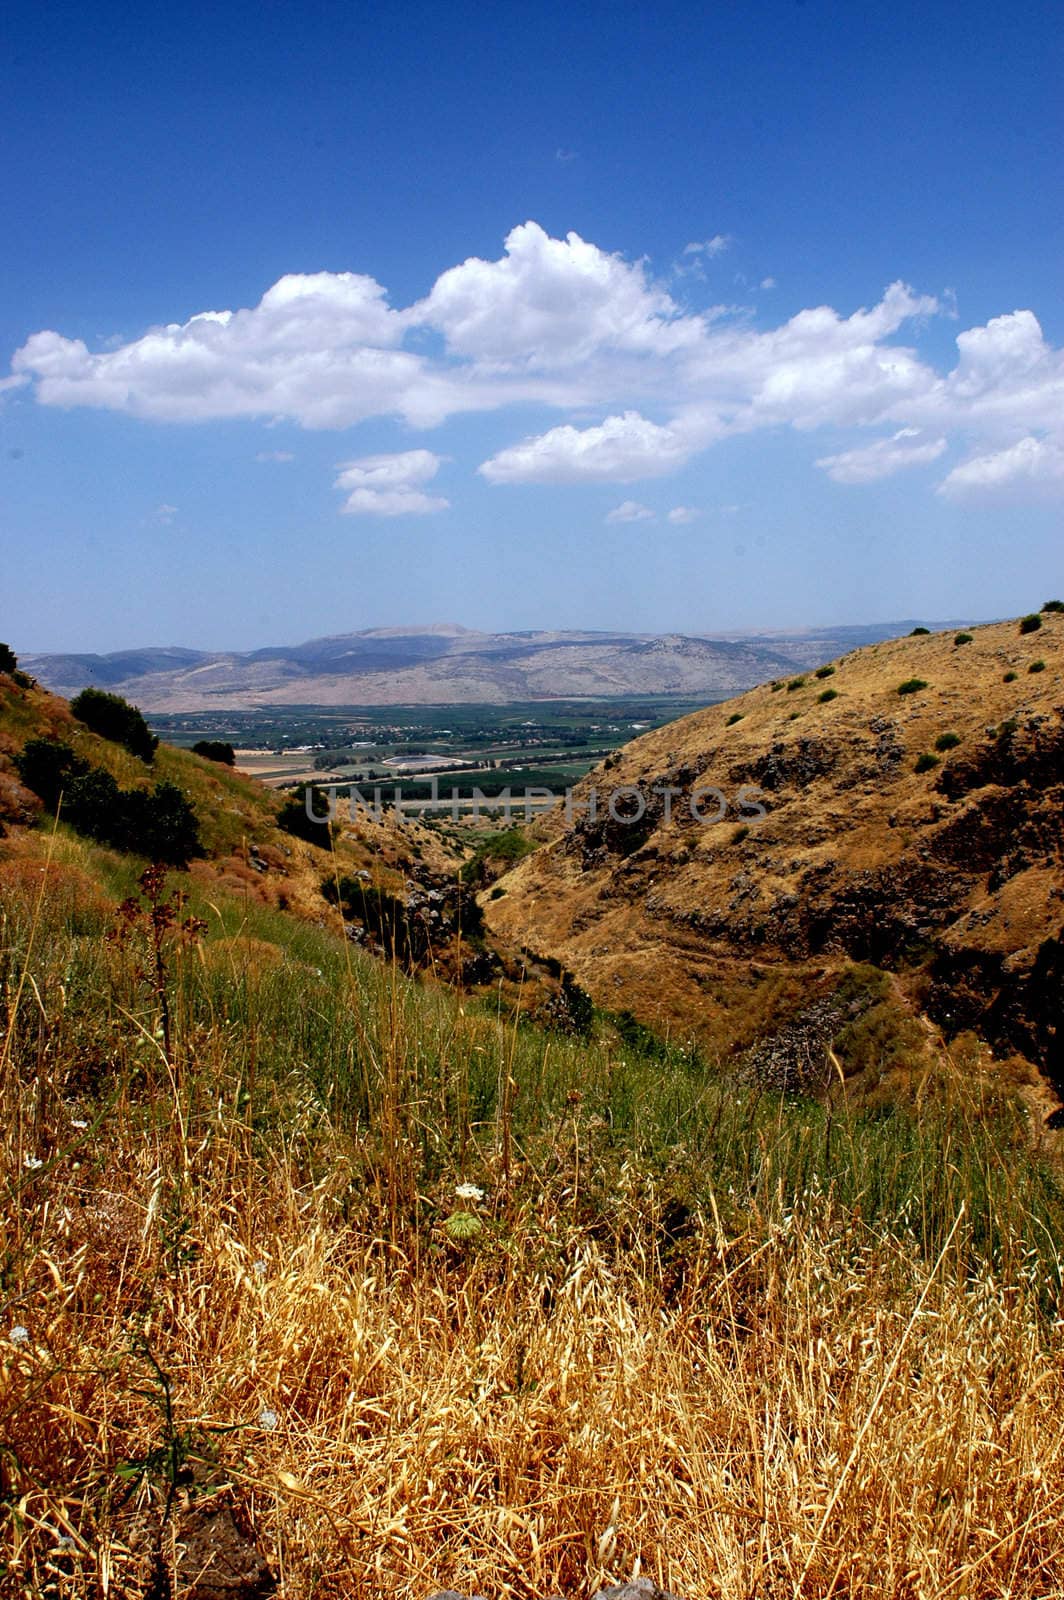 Taken in Negev, Israel. View of the mountains and the city.